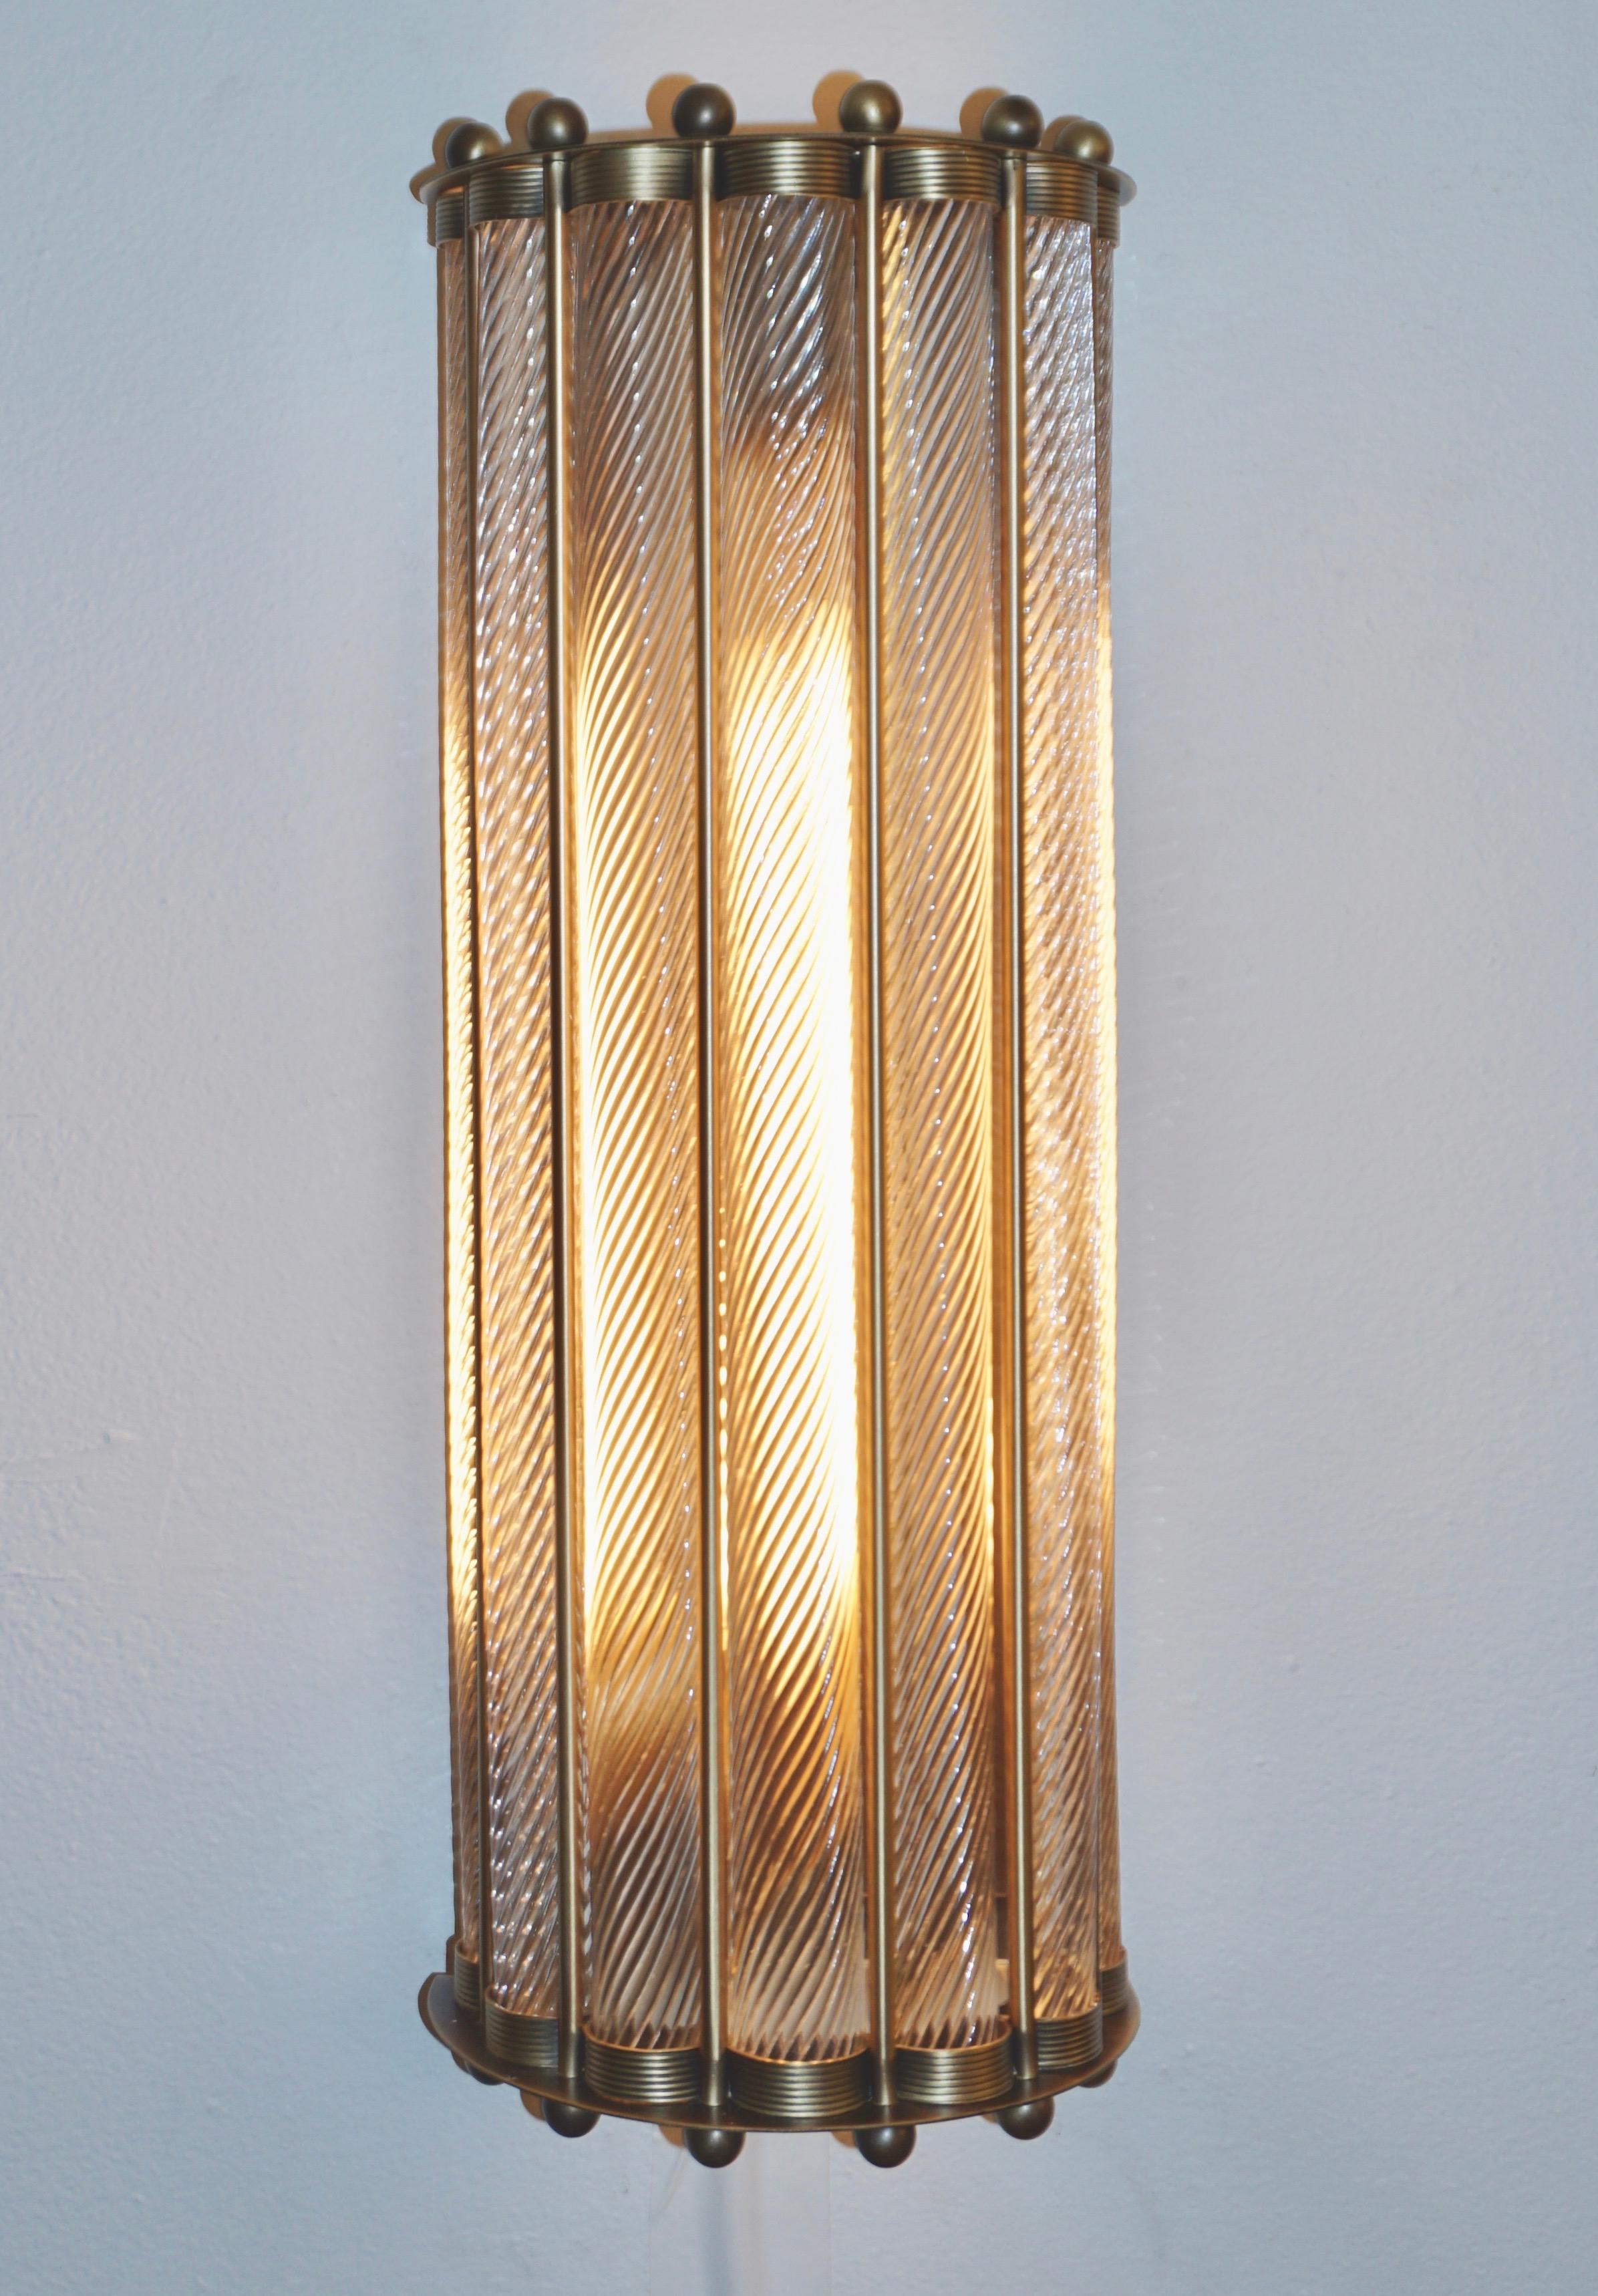 Contemporary customizable Italian Art Deco Design semi-circular wall light, entirely handcrafted, with an antique bronze finish. The nicely scalloped airy brass structure supports crystal clear Murano glass rods worked with the sophisticated